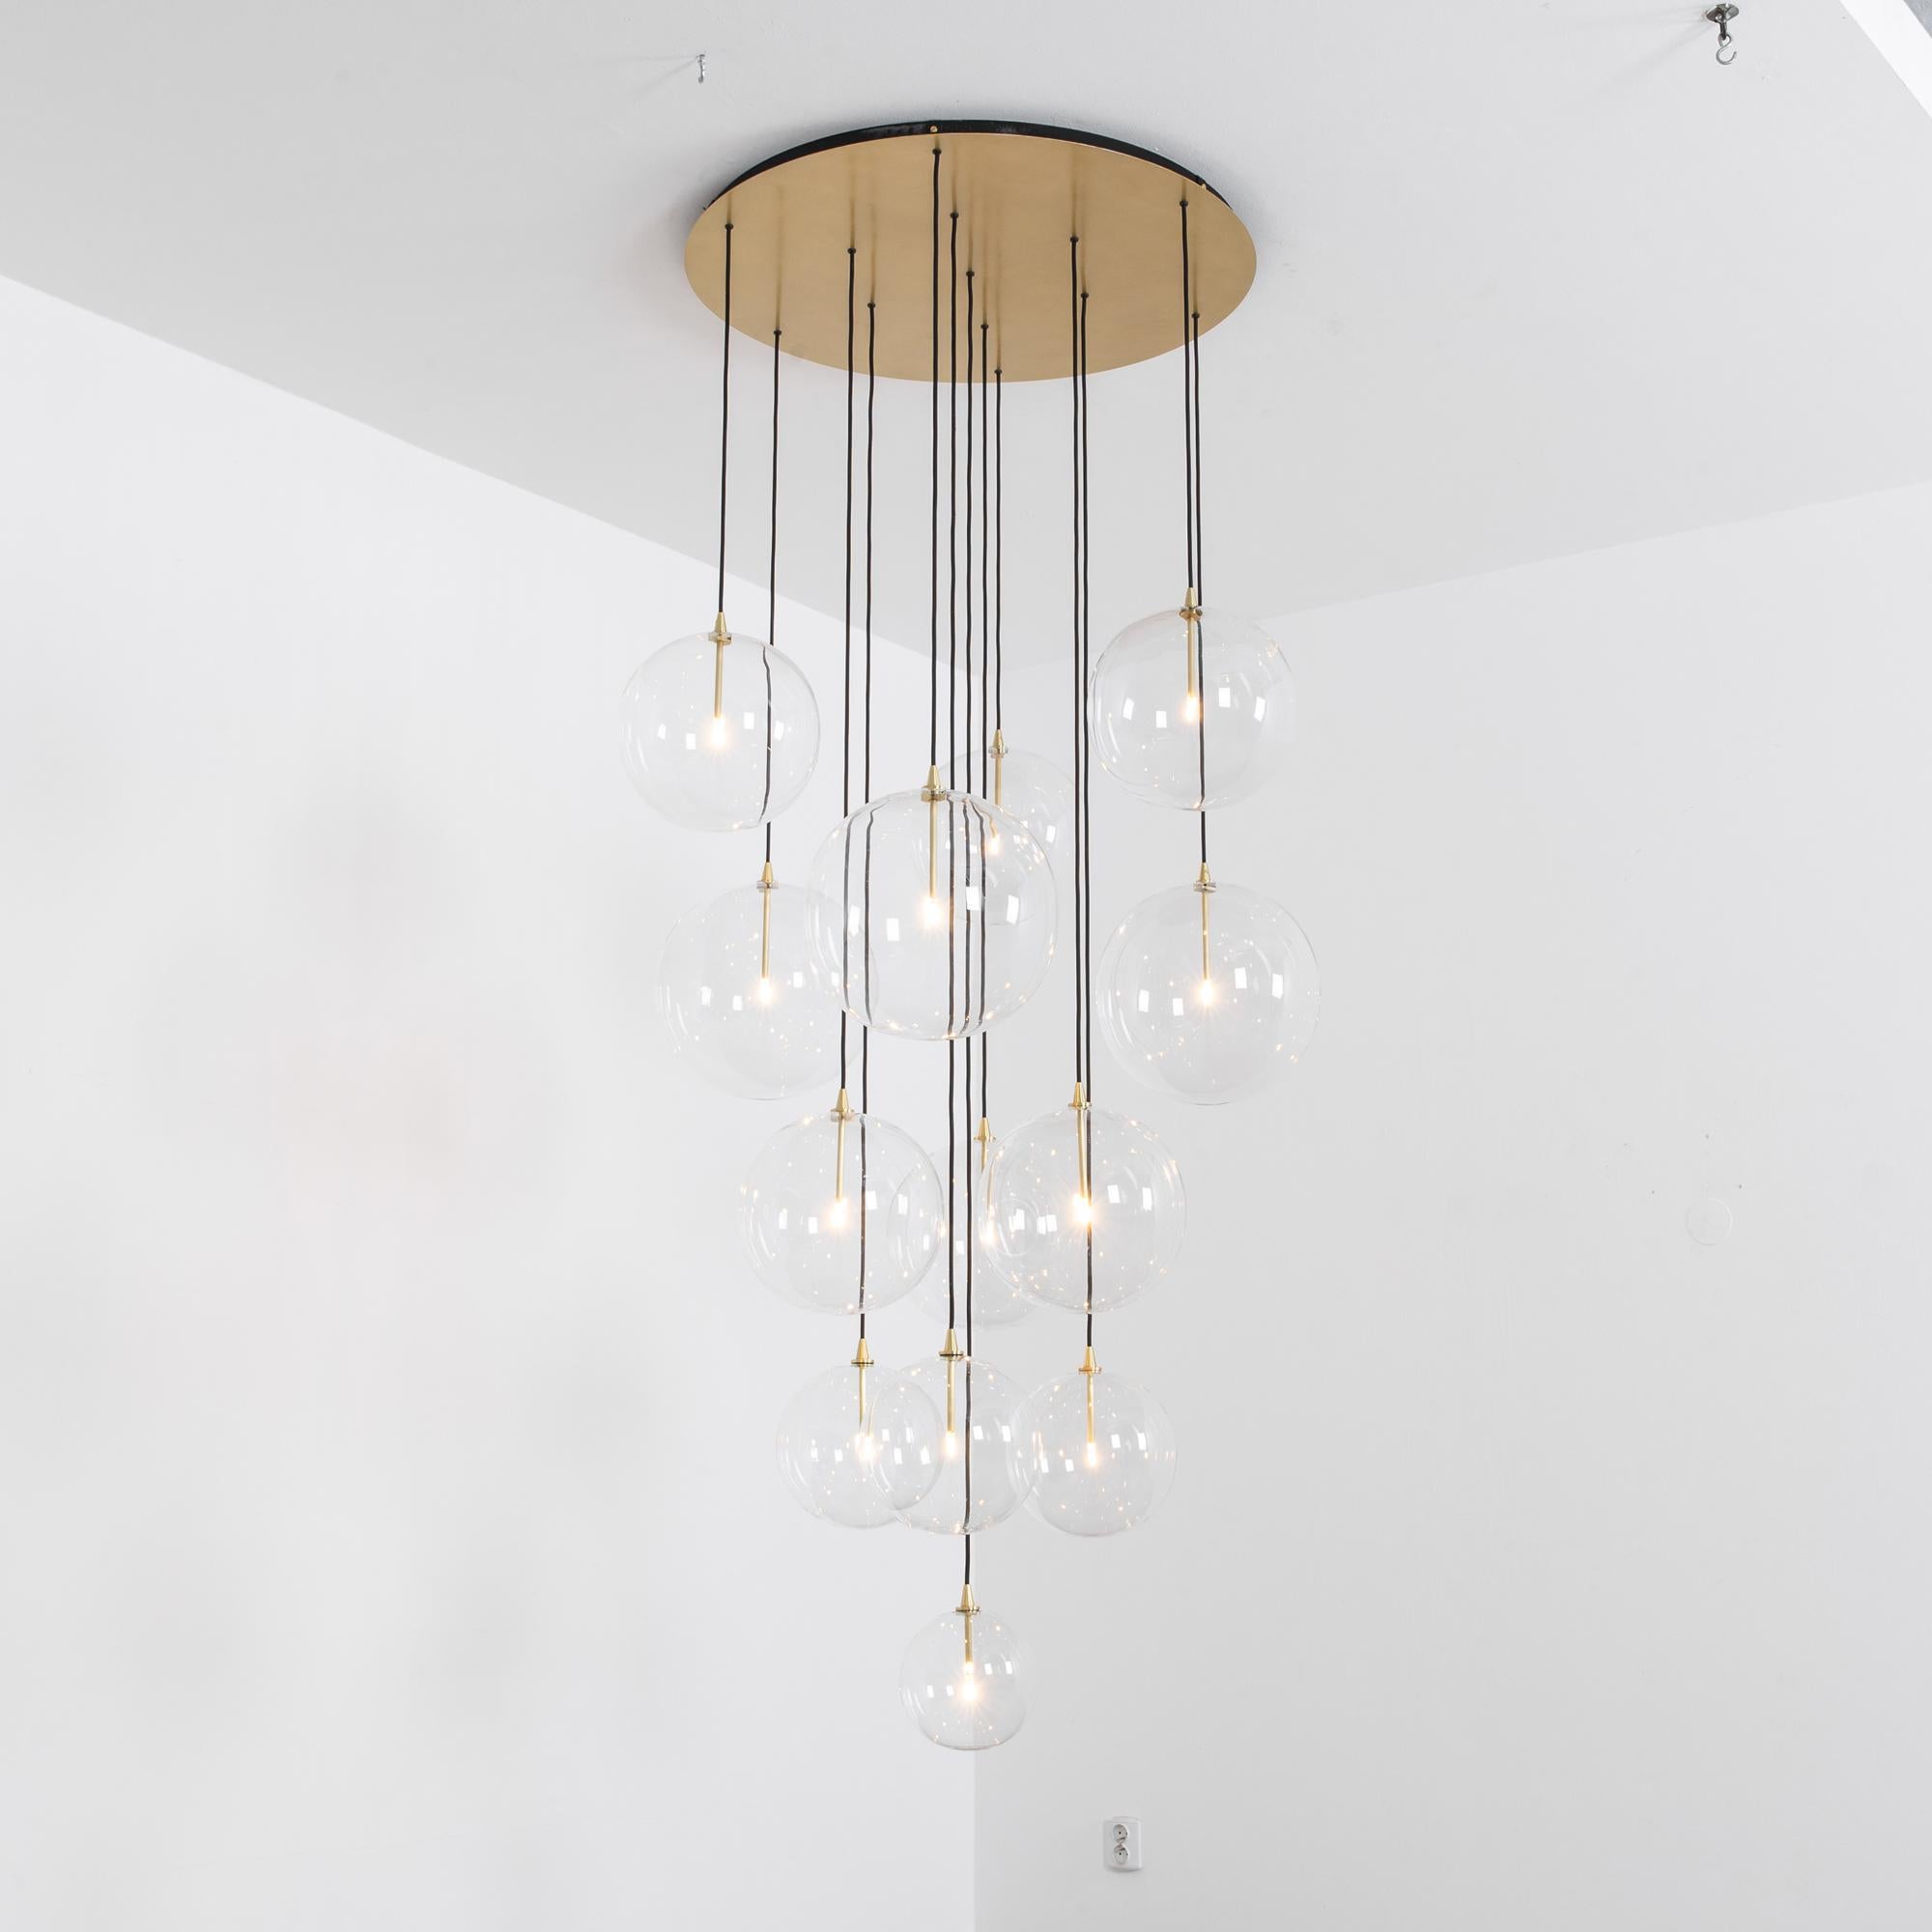 Cluster 13 Mix Brass Chandelier by Schwung
Dimensions: D 112.5 x W 104 x H 320 cm 
Materials: Natural brass, hand blown glass globes

Glass globes diameter 35 / 30 / 25 / 20 / 15 cm
Max wattage 1.6W
Bulb base G4, 12V AC
Lumens 1000lm
Color